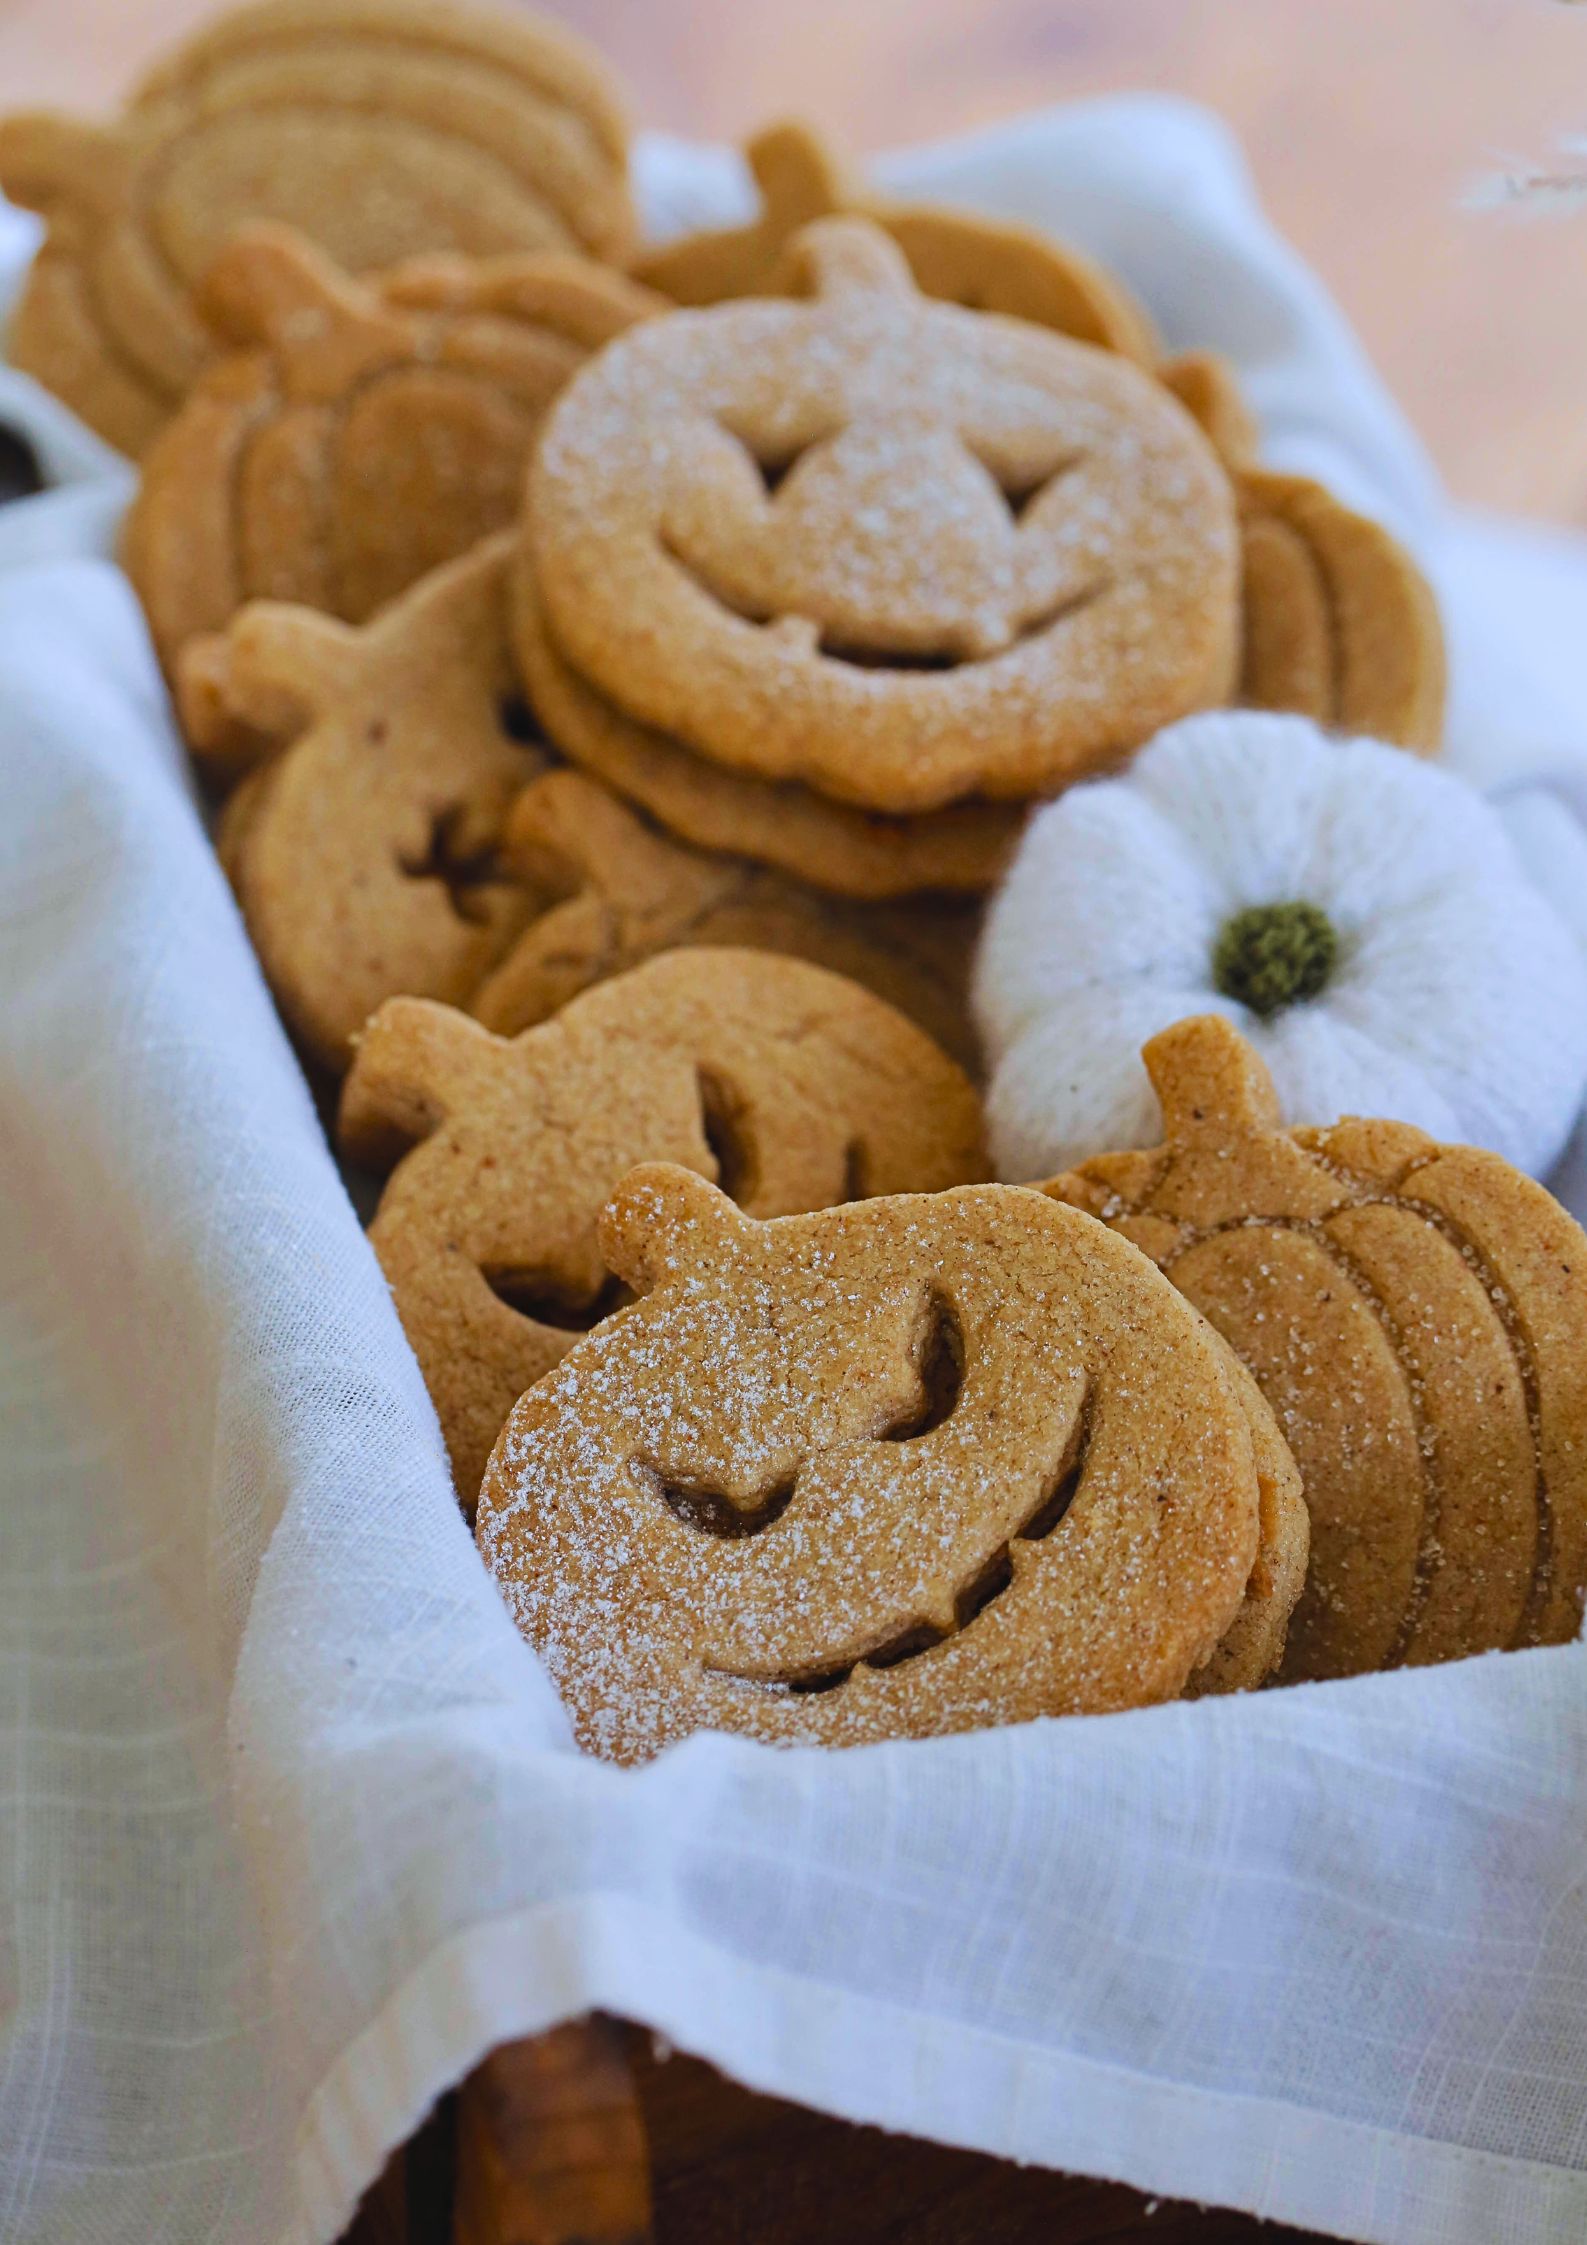 Buttery vegan shortbread flavoured with pumpkin spice make these Halloween cookies frightfully delicious! An easy Halloween treat for all ages | Recipe on thecookandhim.com #halloweencookies #pumpkinspice #veganhalloween